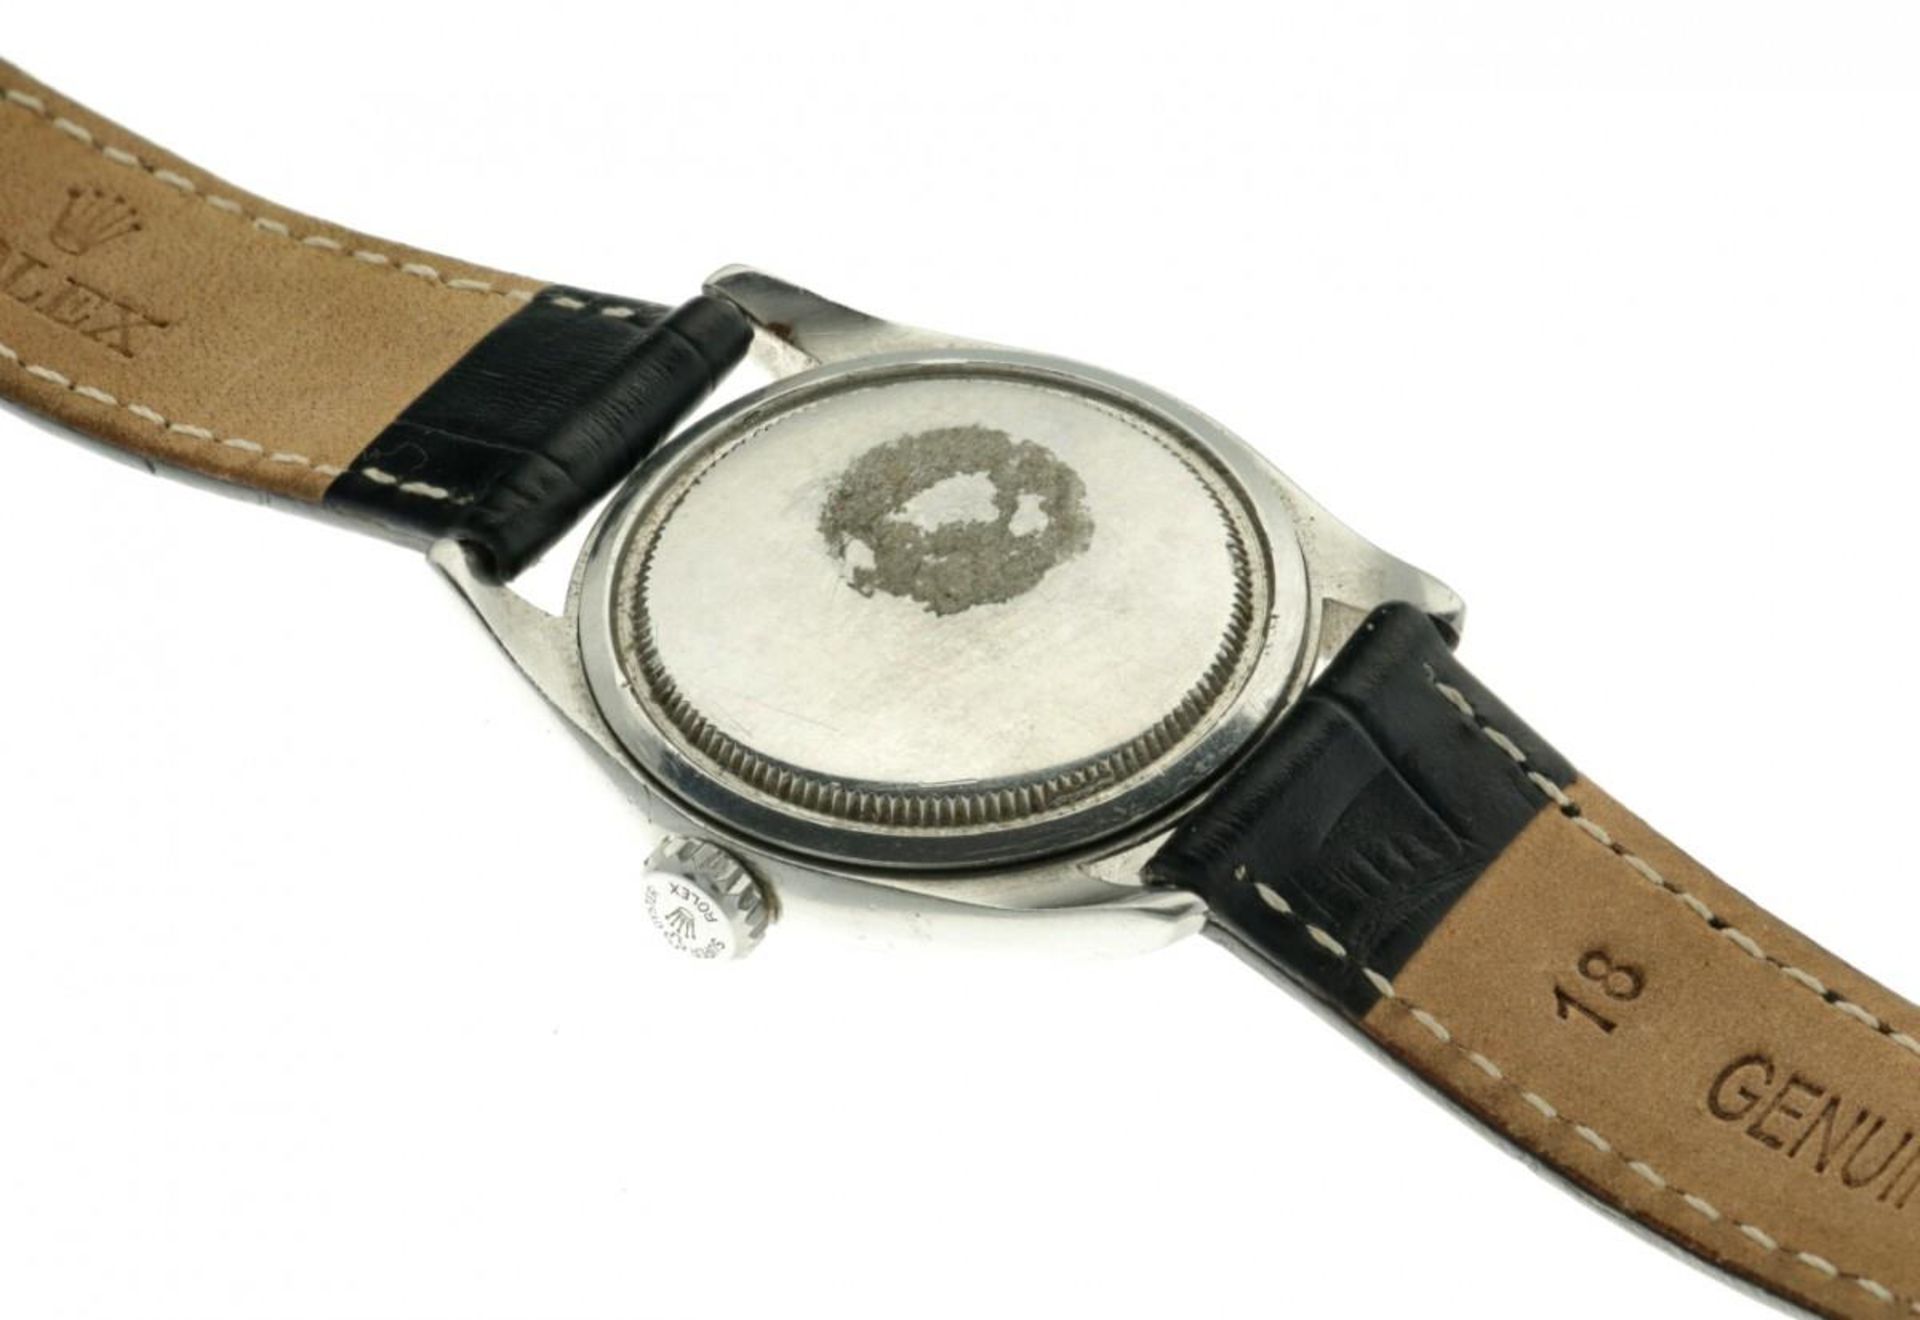 Rolex Oyster Precision 6082 - Men's watch - apprx. 1950. - Image 7 of 7